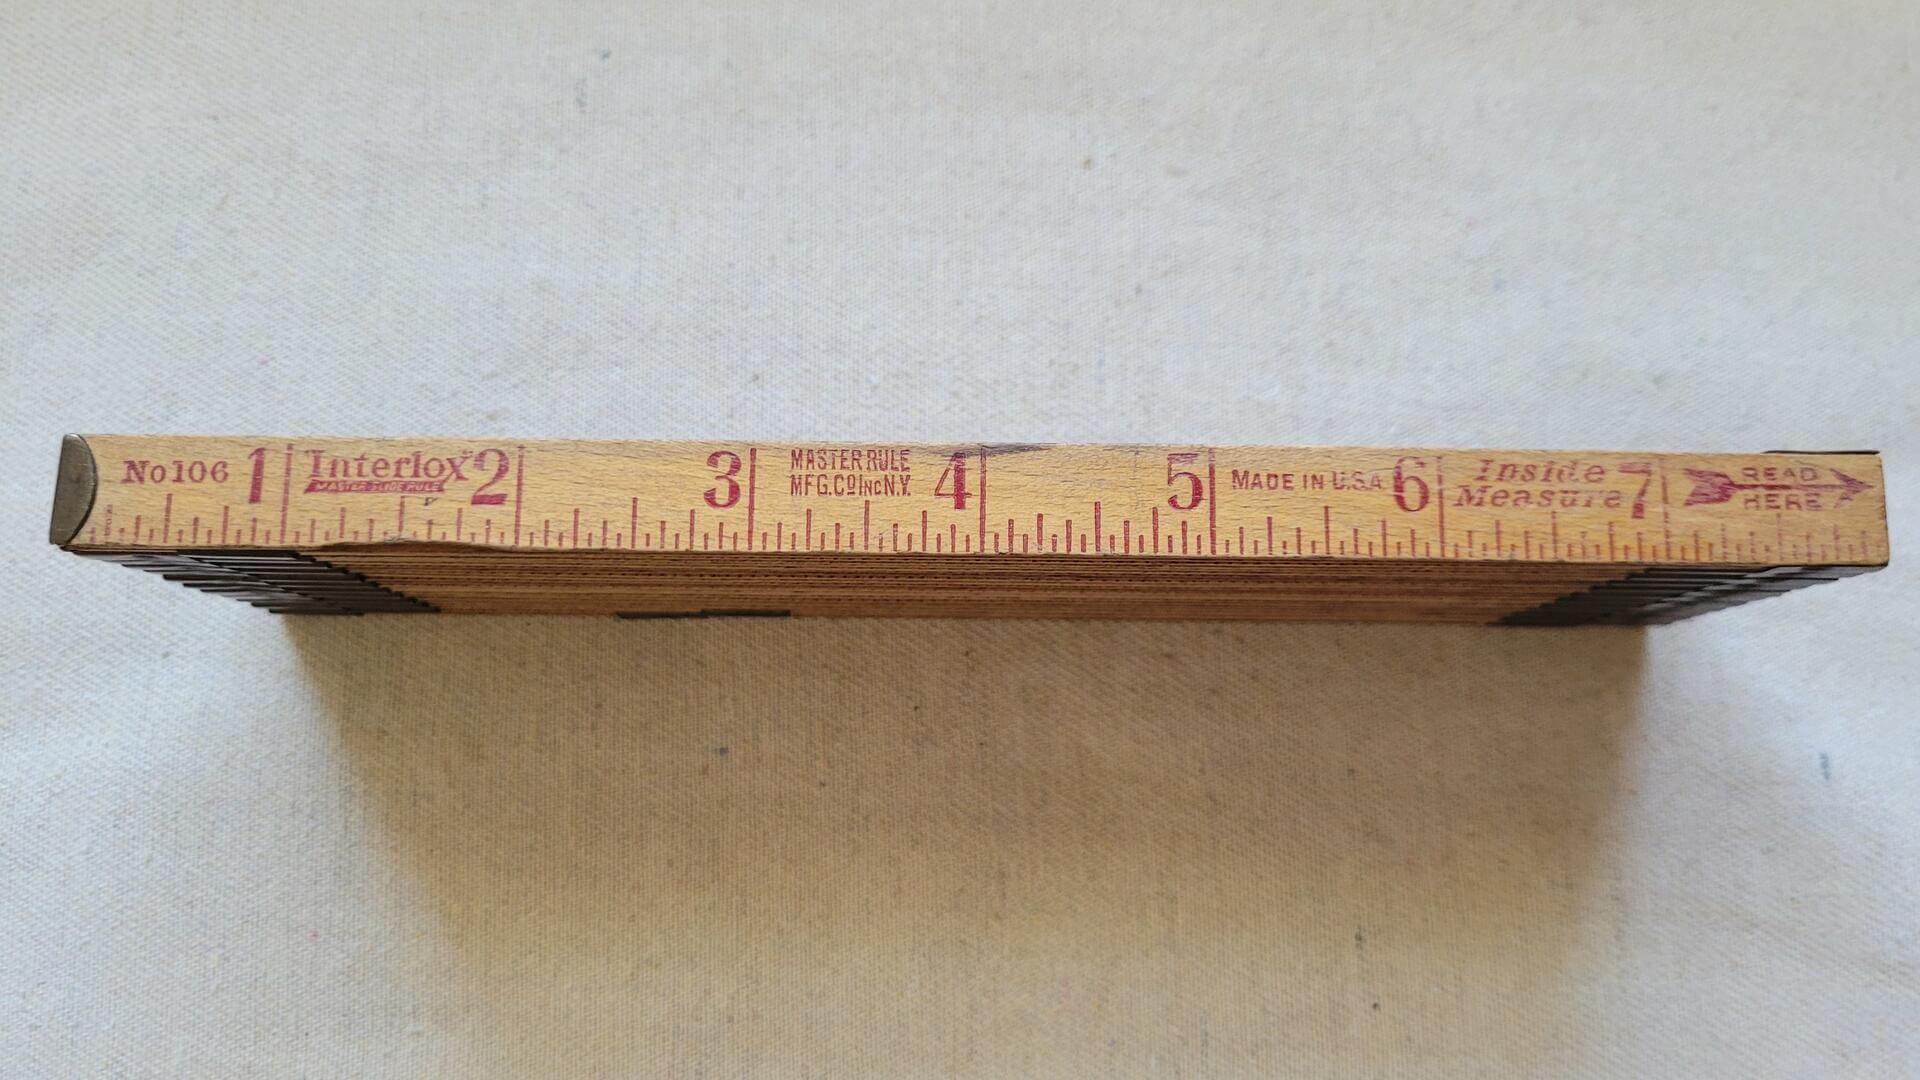 Vintage Wooden Slide Ruler Interlox No. 106 Master Rule Mfg. Co. NY - Antique Woodworking and Carpentry Collectible made in USA marking and measuring tools